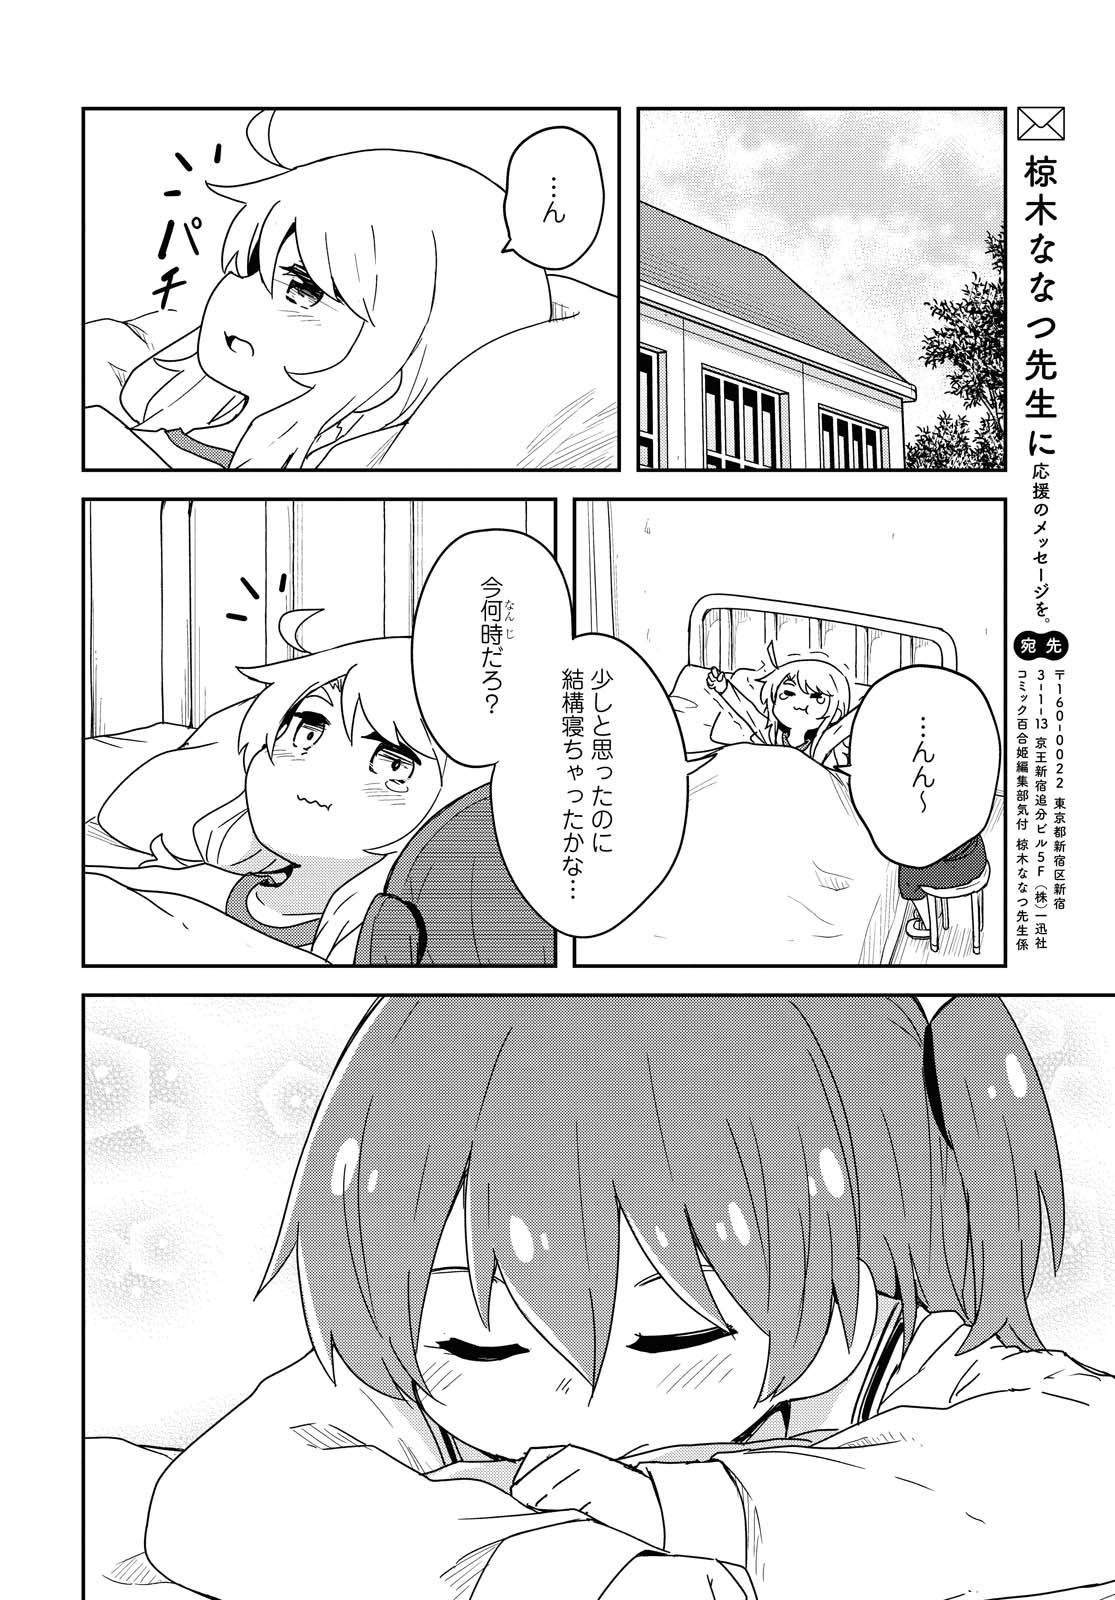 Wataten! An Angel Flew Down to Me 私に天使が舞い降りた！ 第76話 - Page 10